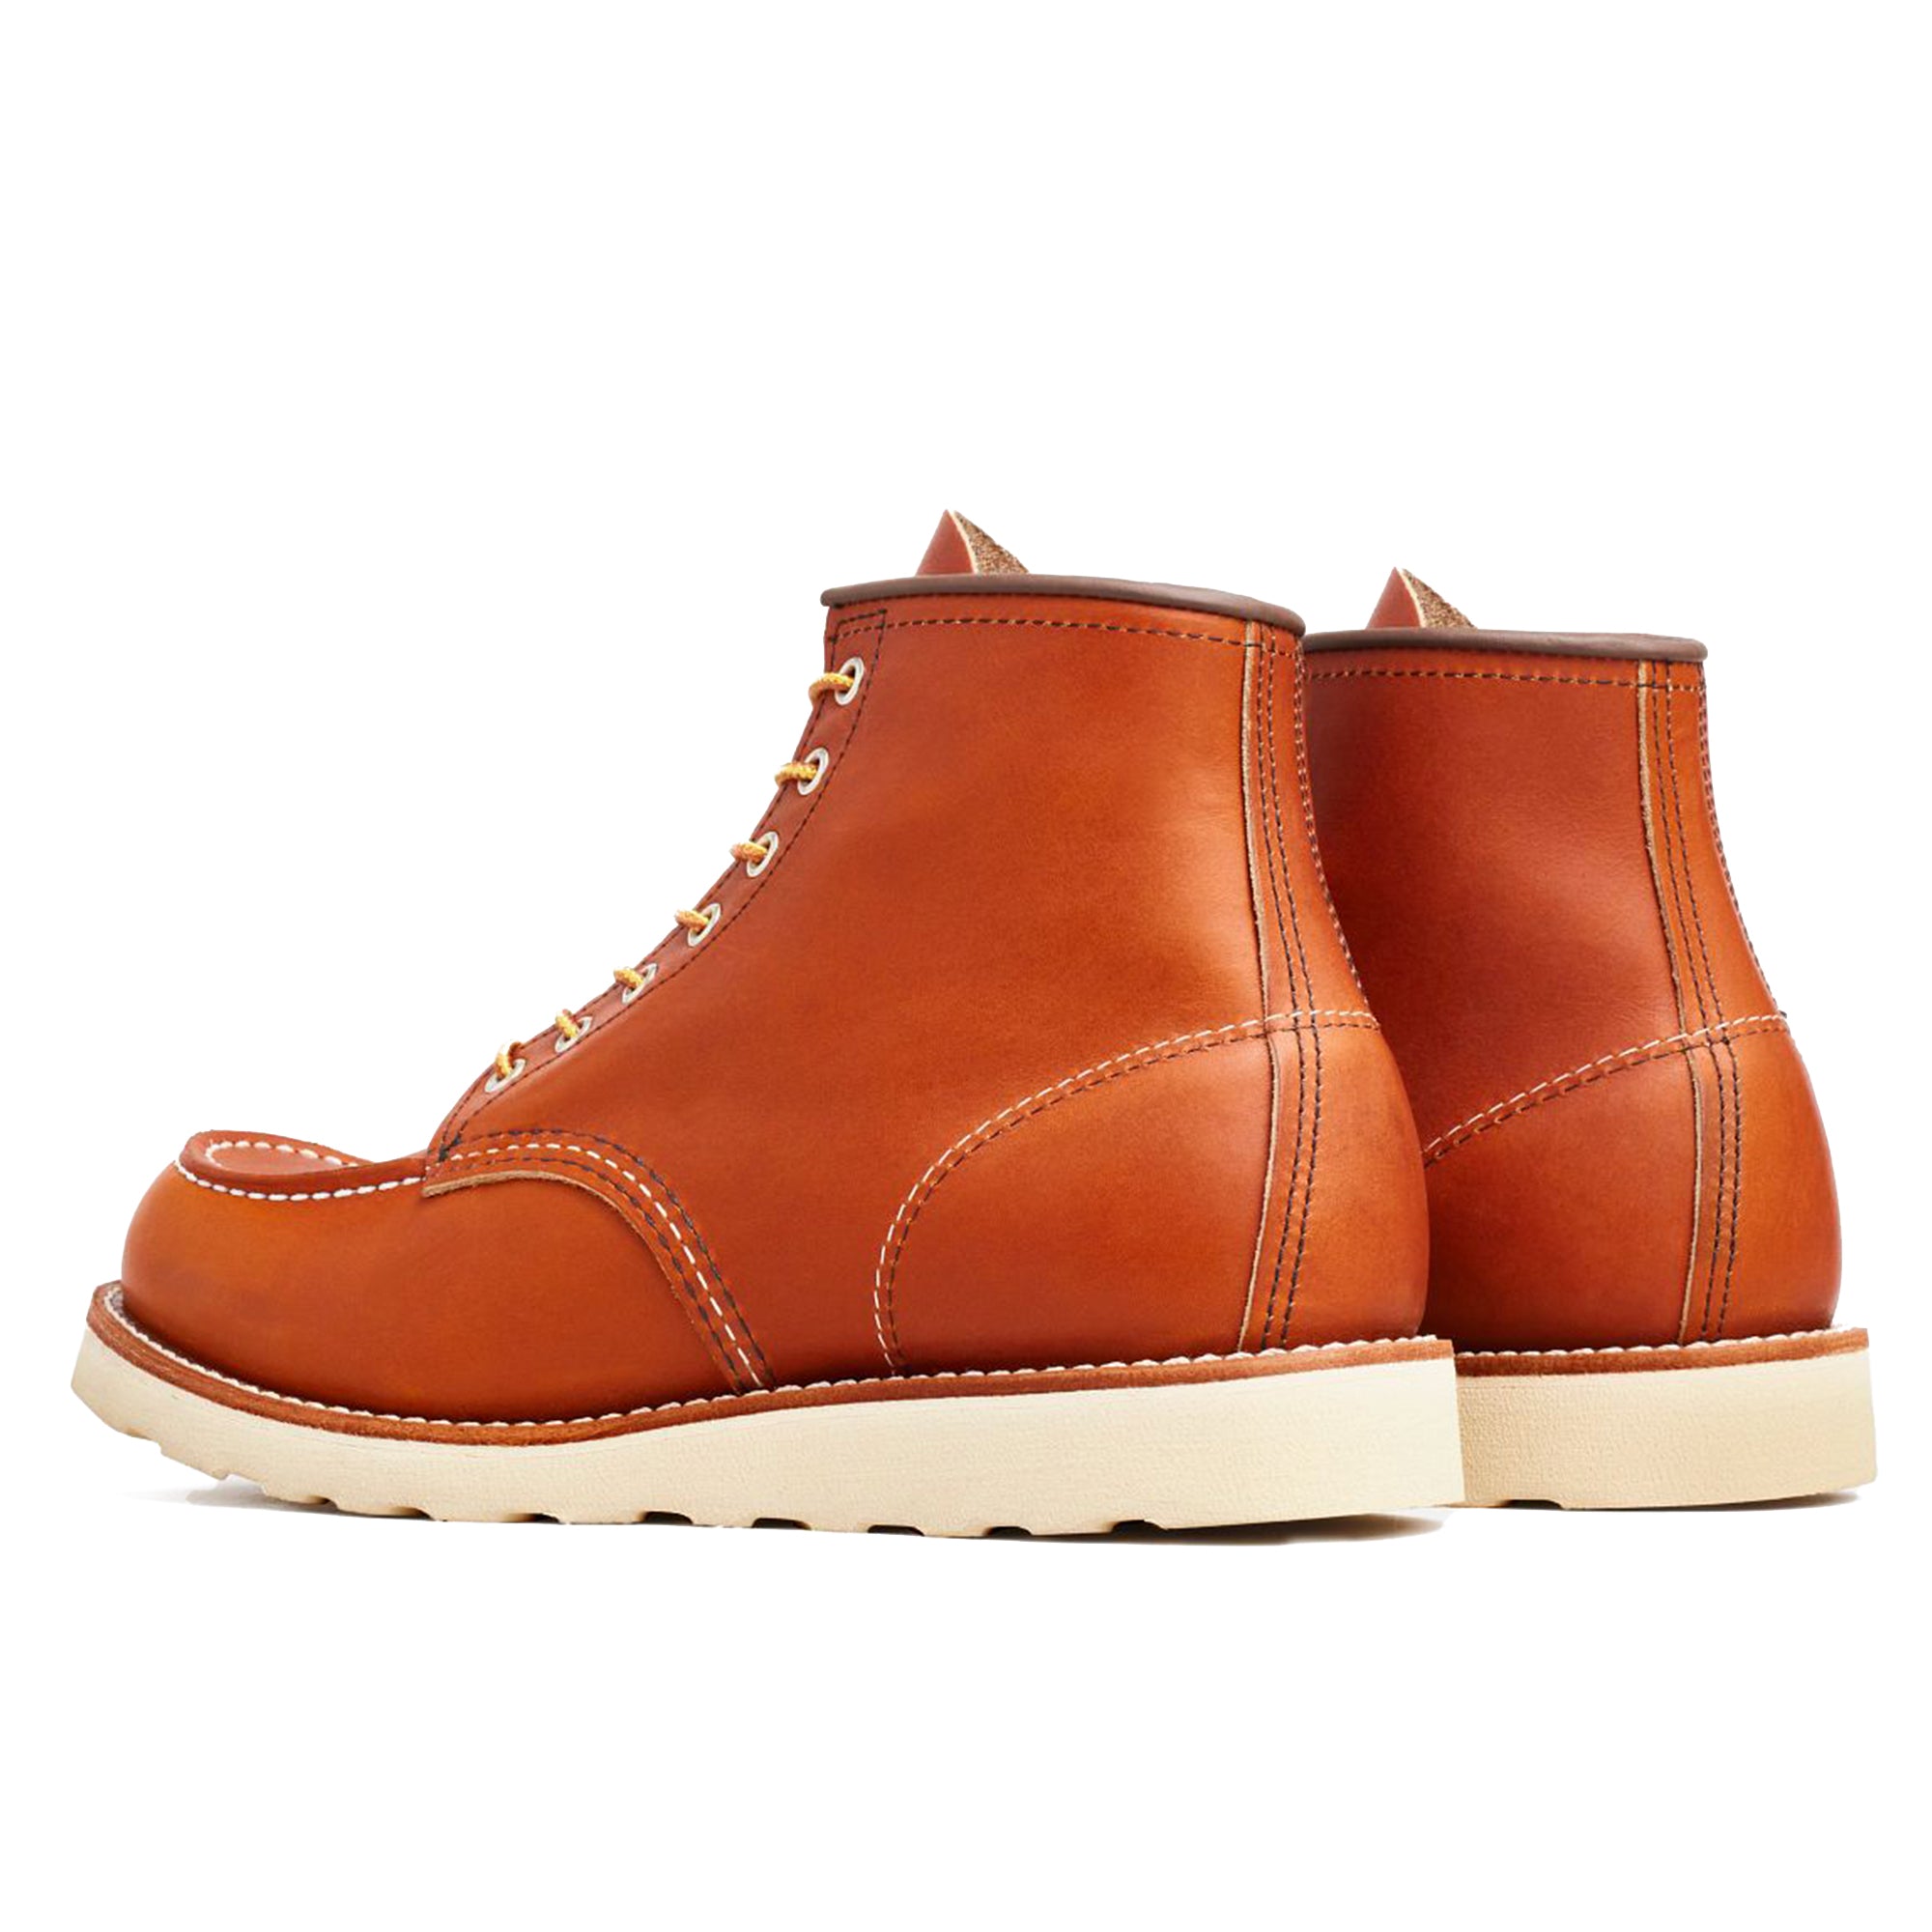 Red Wing 875  6" Moc Toe Leather Boot - Oro Legacy Tan